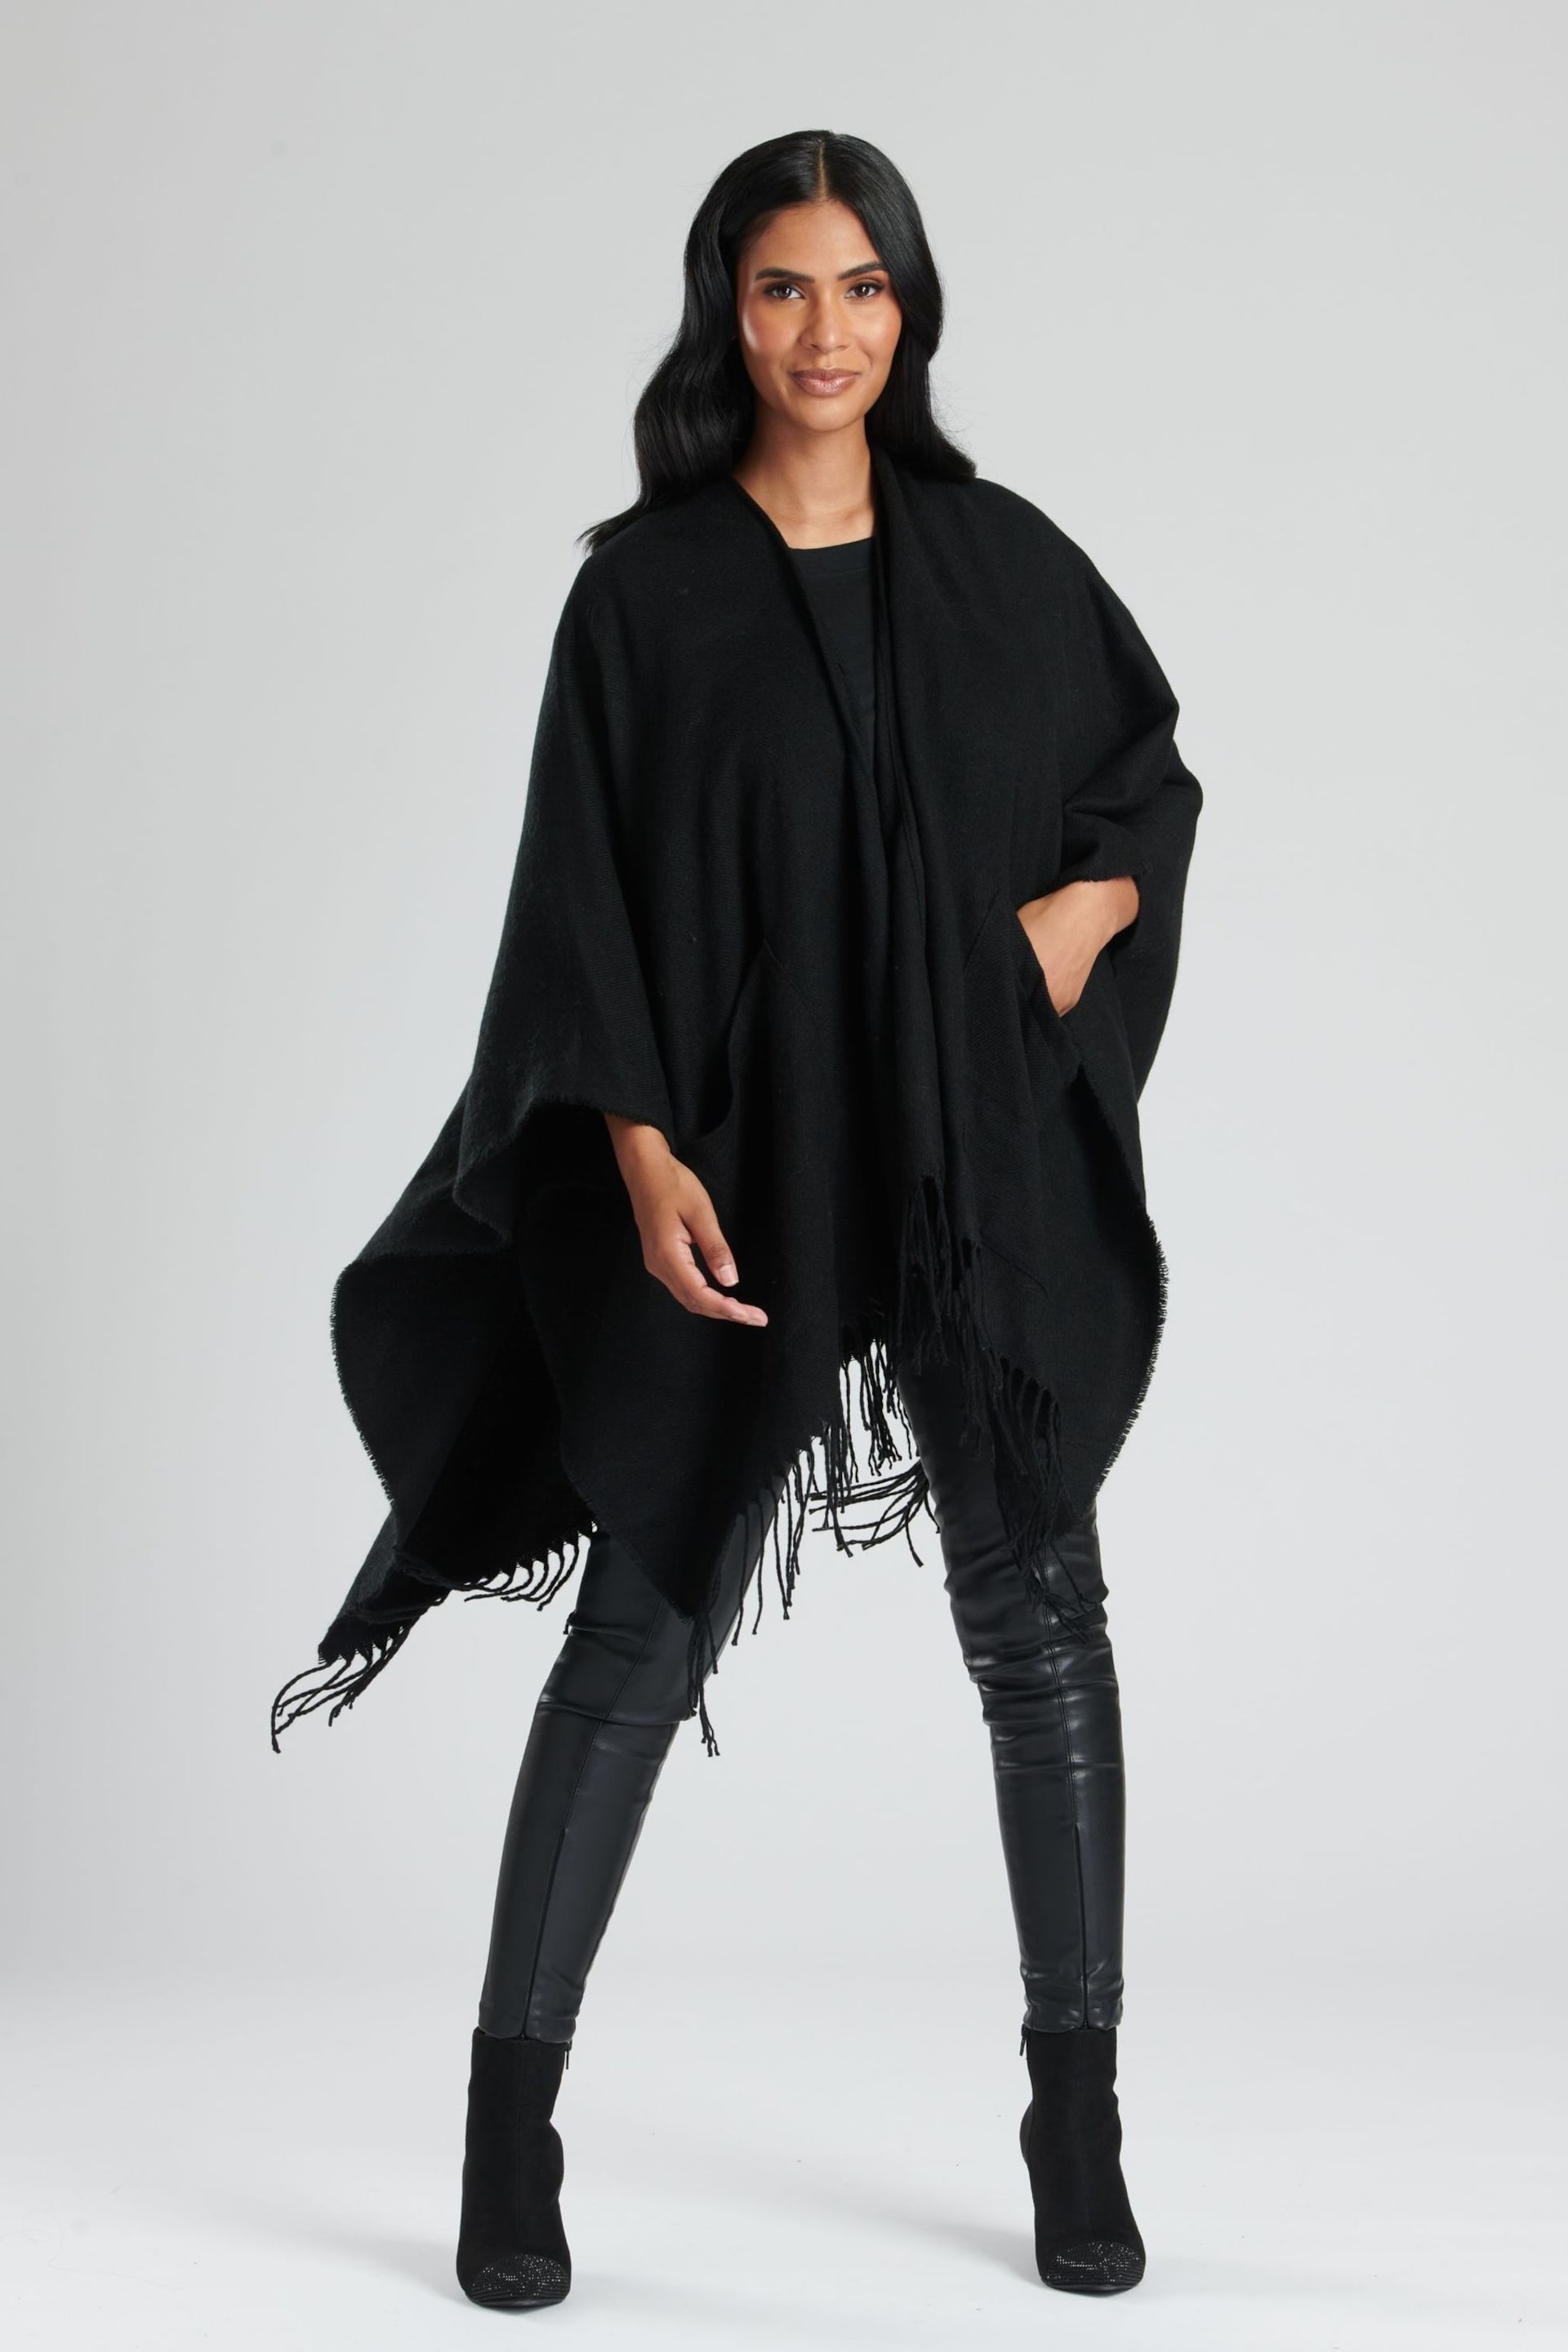 South Beach Black Knitted Fringe Wrap - Image 3 of 5